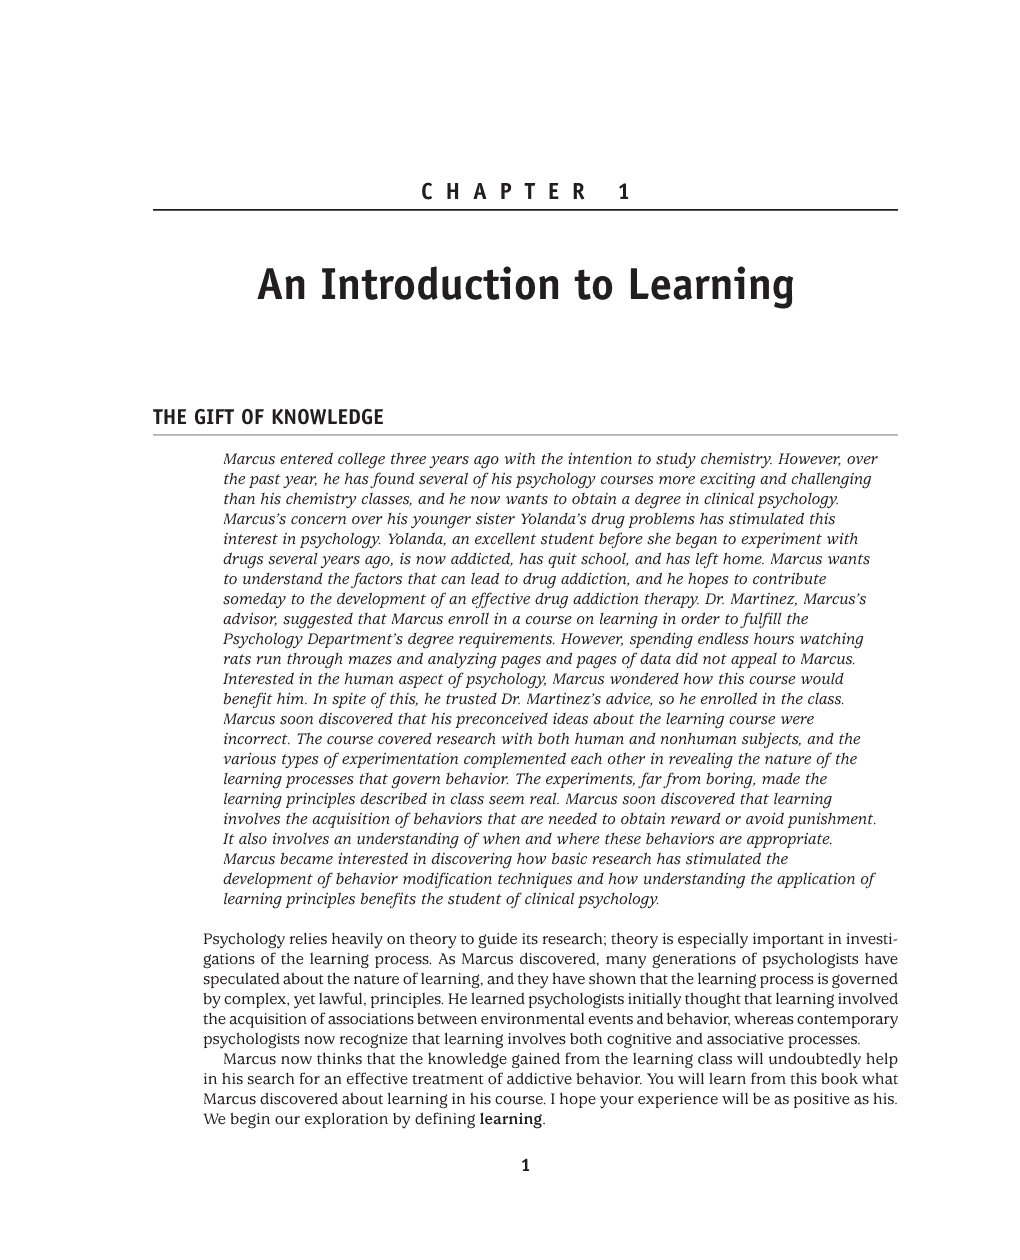 An Introduction to Learning